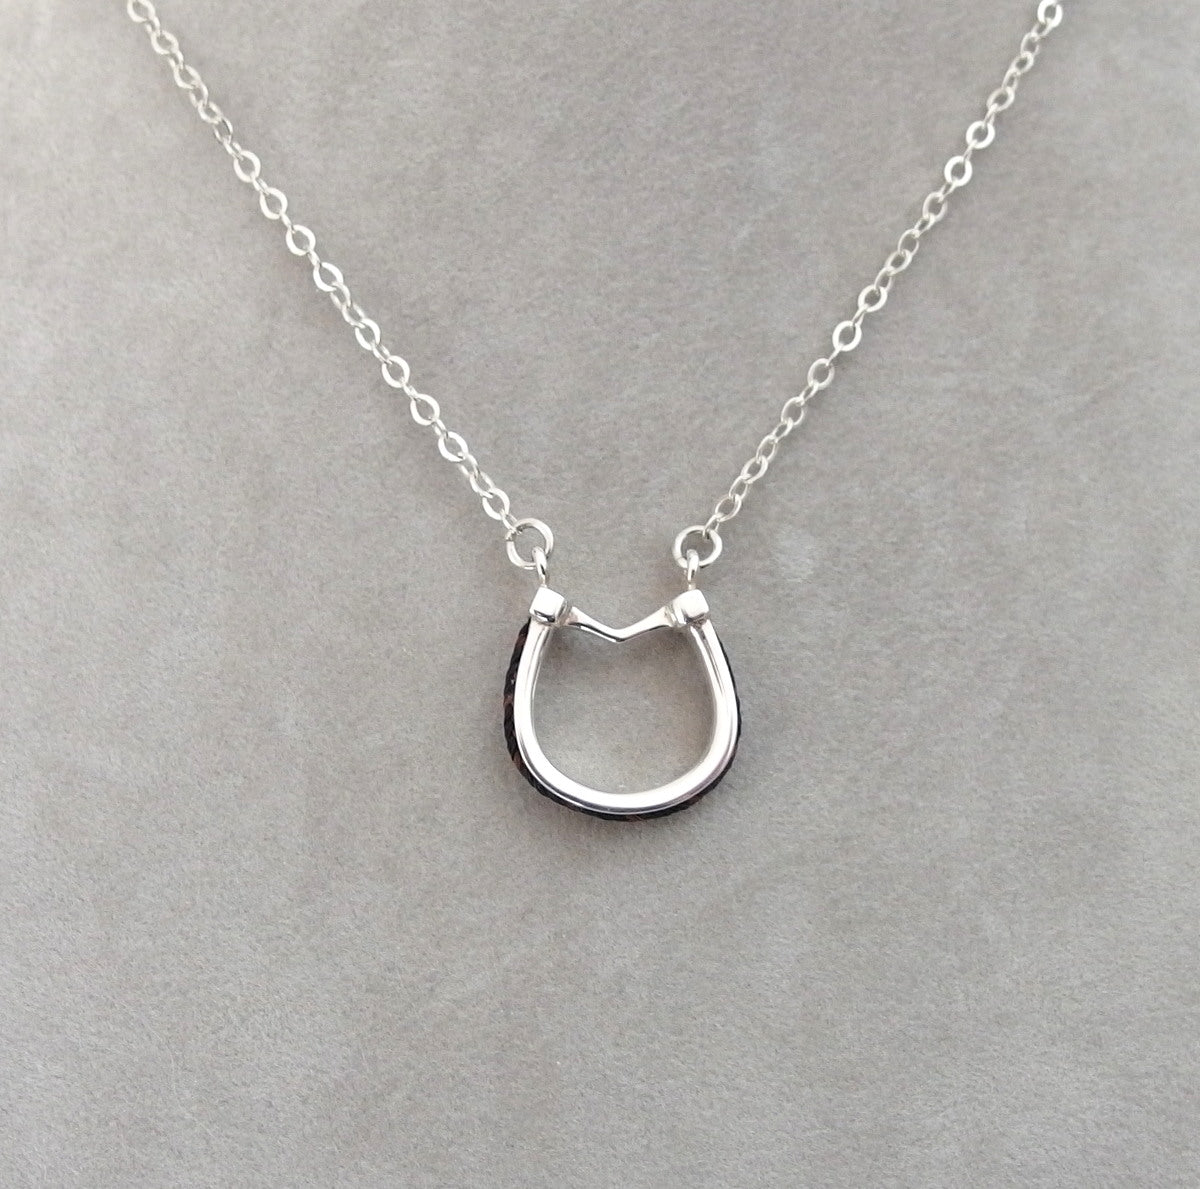 Small Horseshoe Necklace with Horsehair Braid